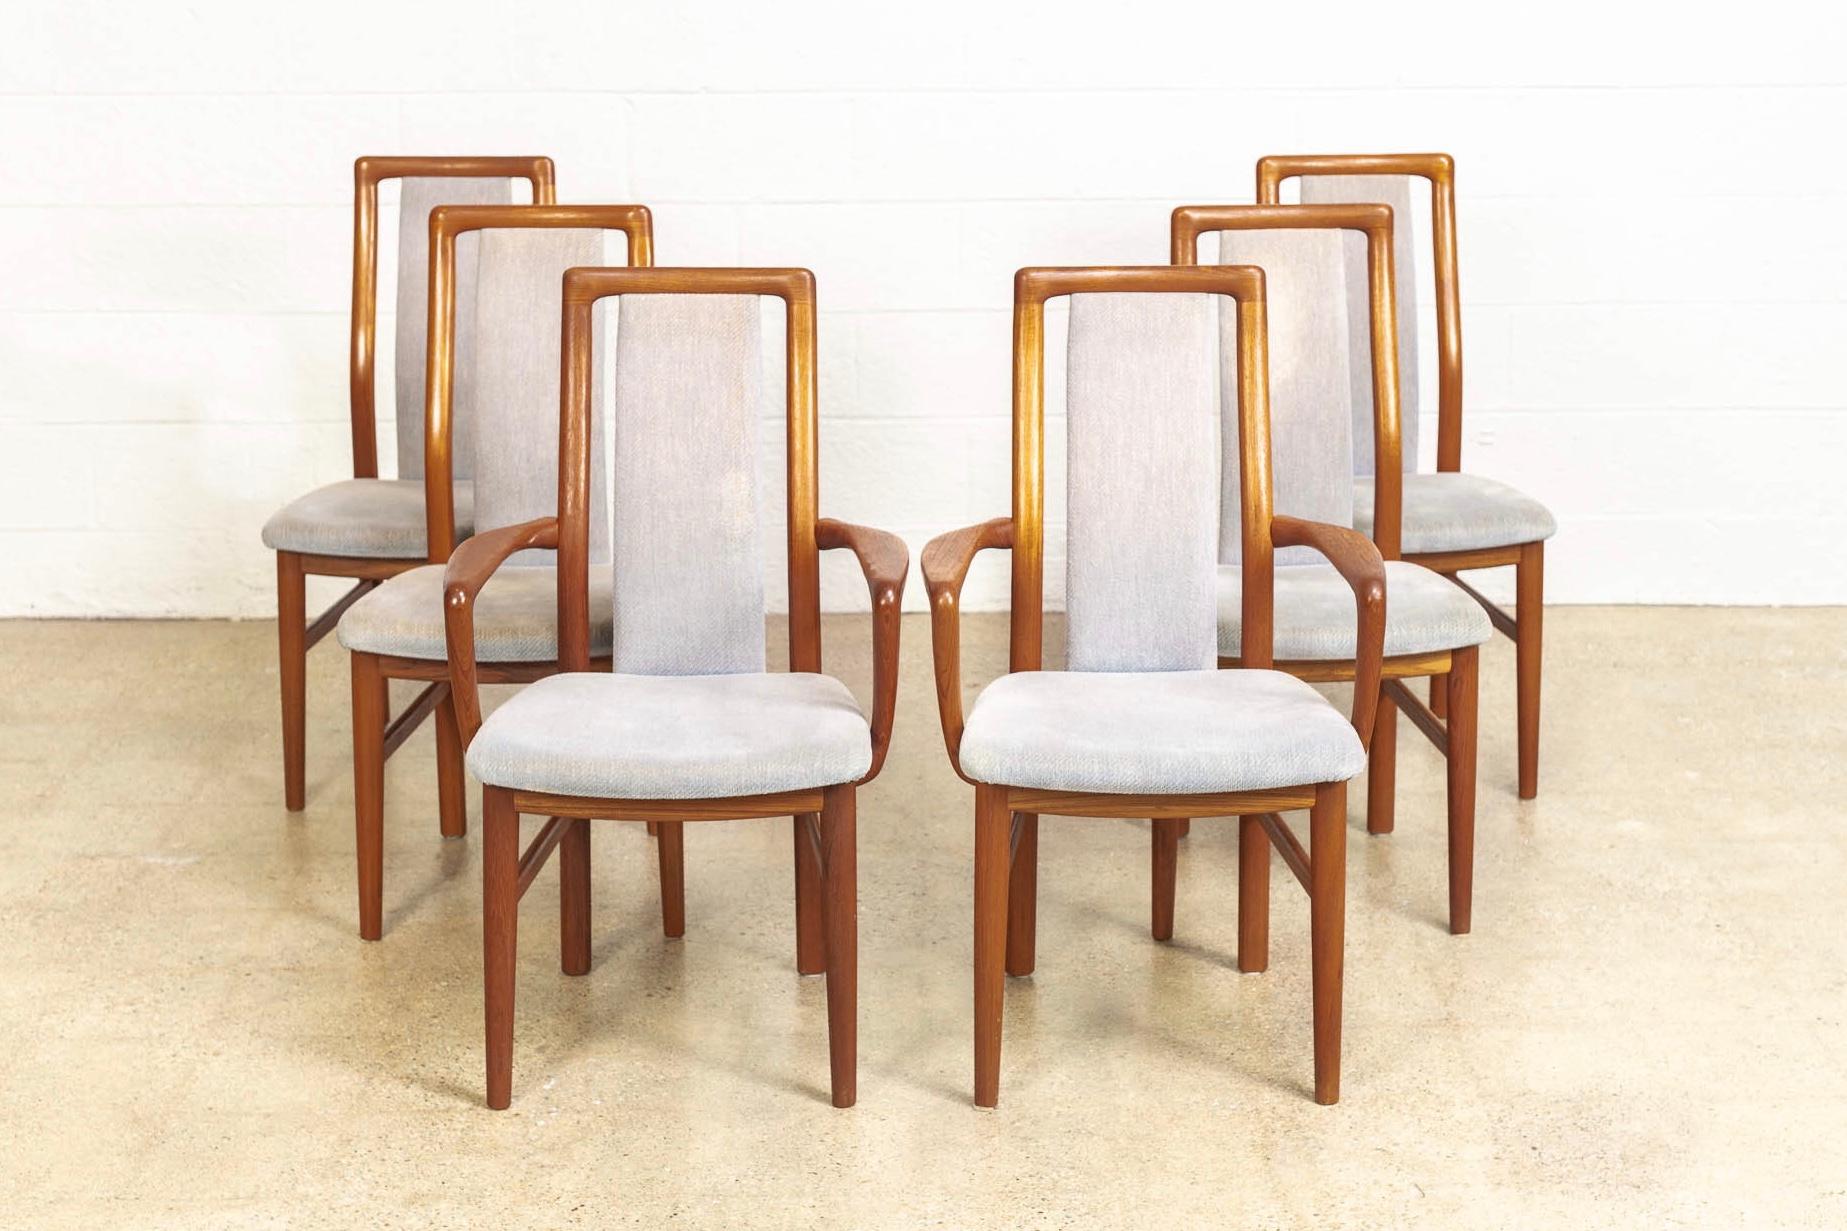 This set of 6 vintage Mid-century Danish modern dining chairs are circa 1960. The Classic Danish modern design features clean lines and elegant curves. The chair frames are made of solid teak wood and feature high backs and a beautiful sculpted